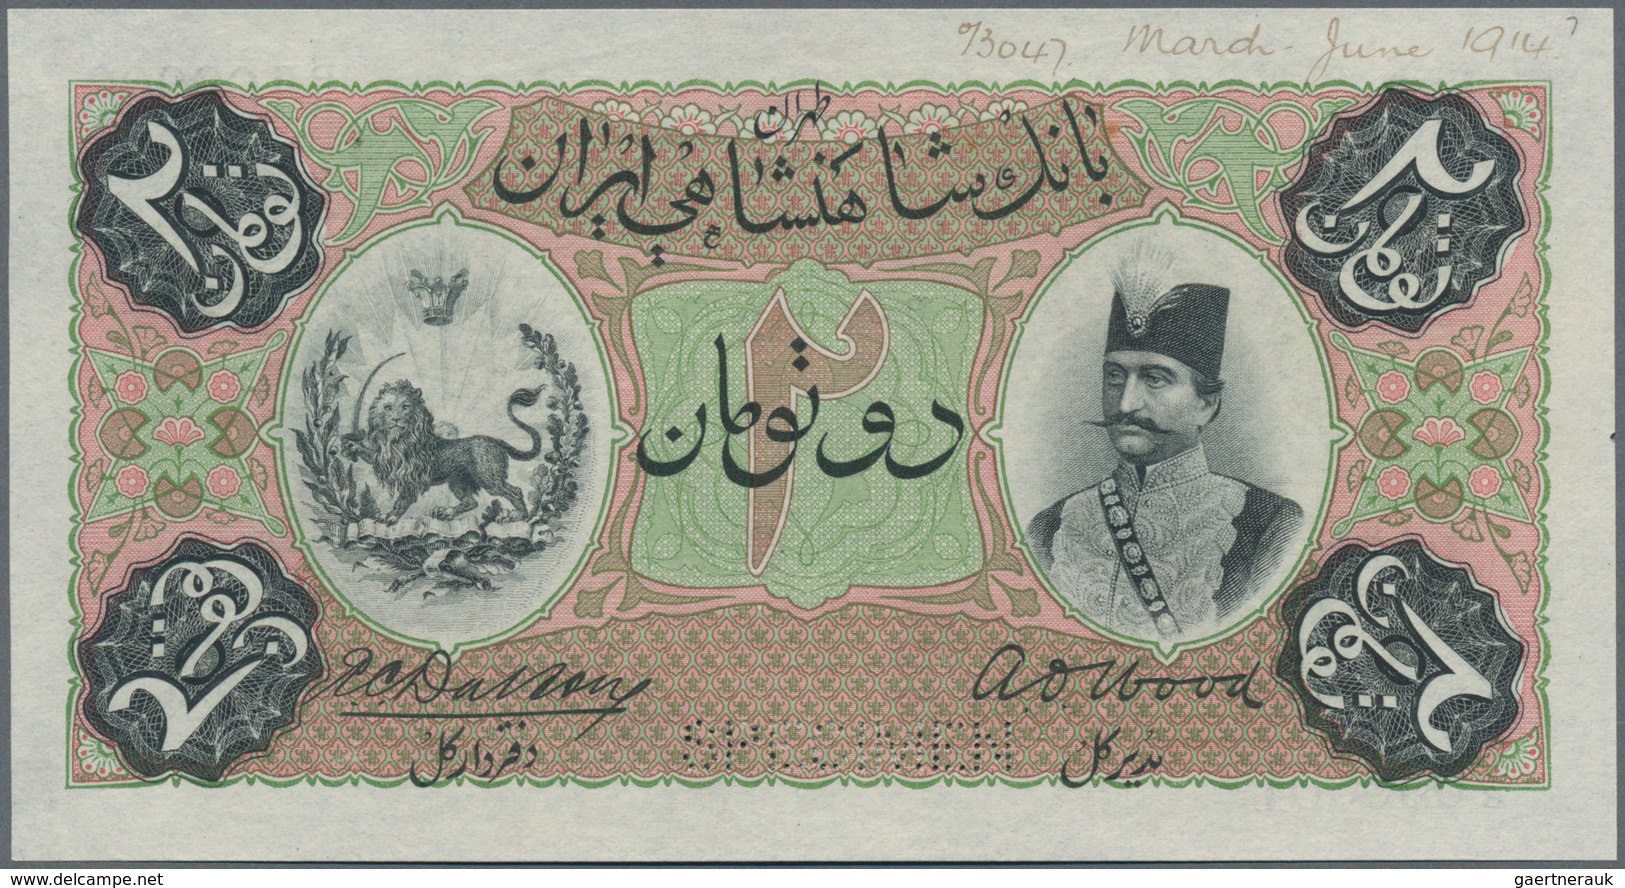 Iran: Imperial Bank Of Persia 200 Tomans 1890-1923 Specimen With Serial Numbers P/B 000000 And P/B 0 - Irán